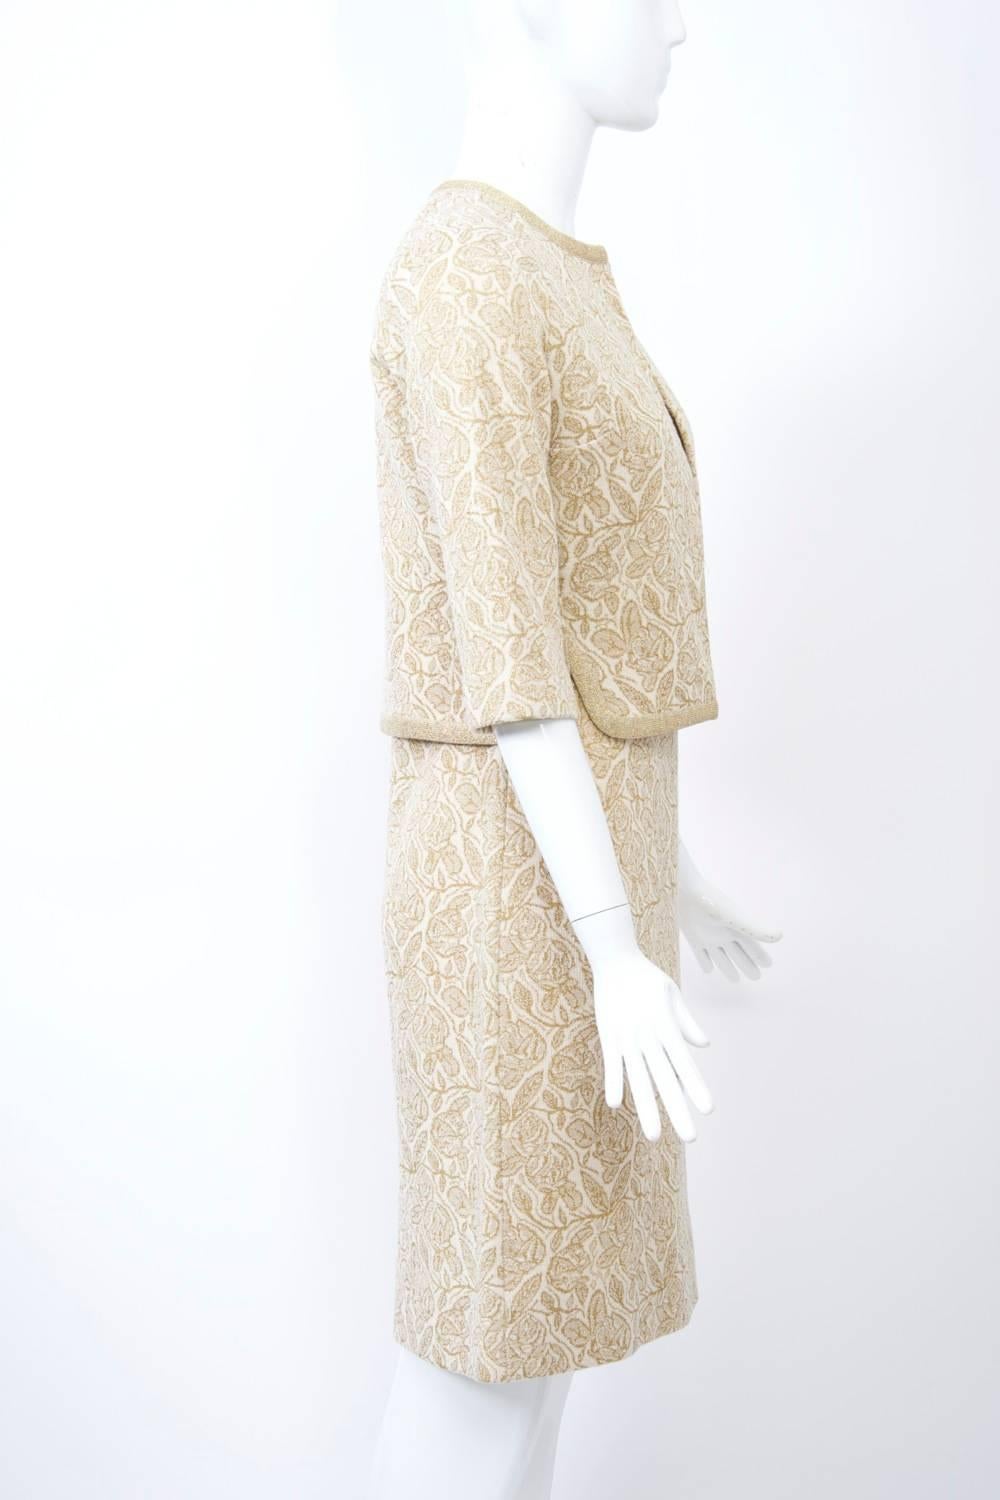 Kimberly was one of the best knitwear manufacturers in mid-century America. This ensemble, from the 1960s, consists of a sheath dress and short, open jacket of ivory ground with gold metallic weave in an abstract leaf pattern. The body hugging dress